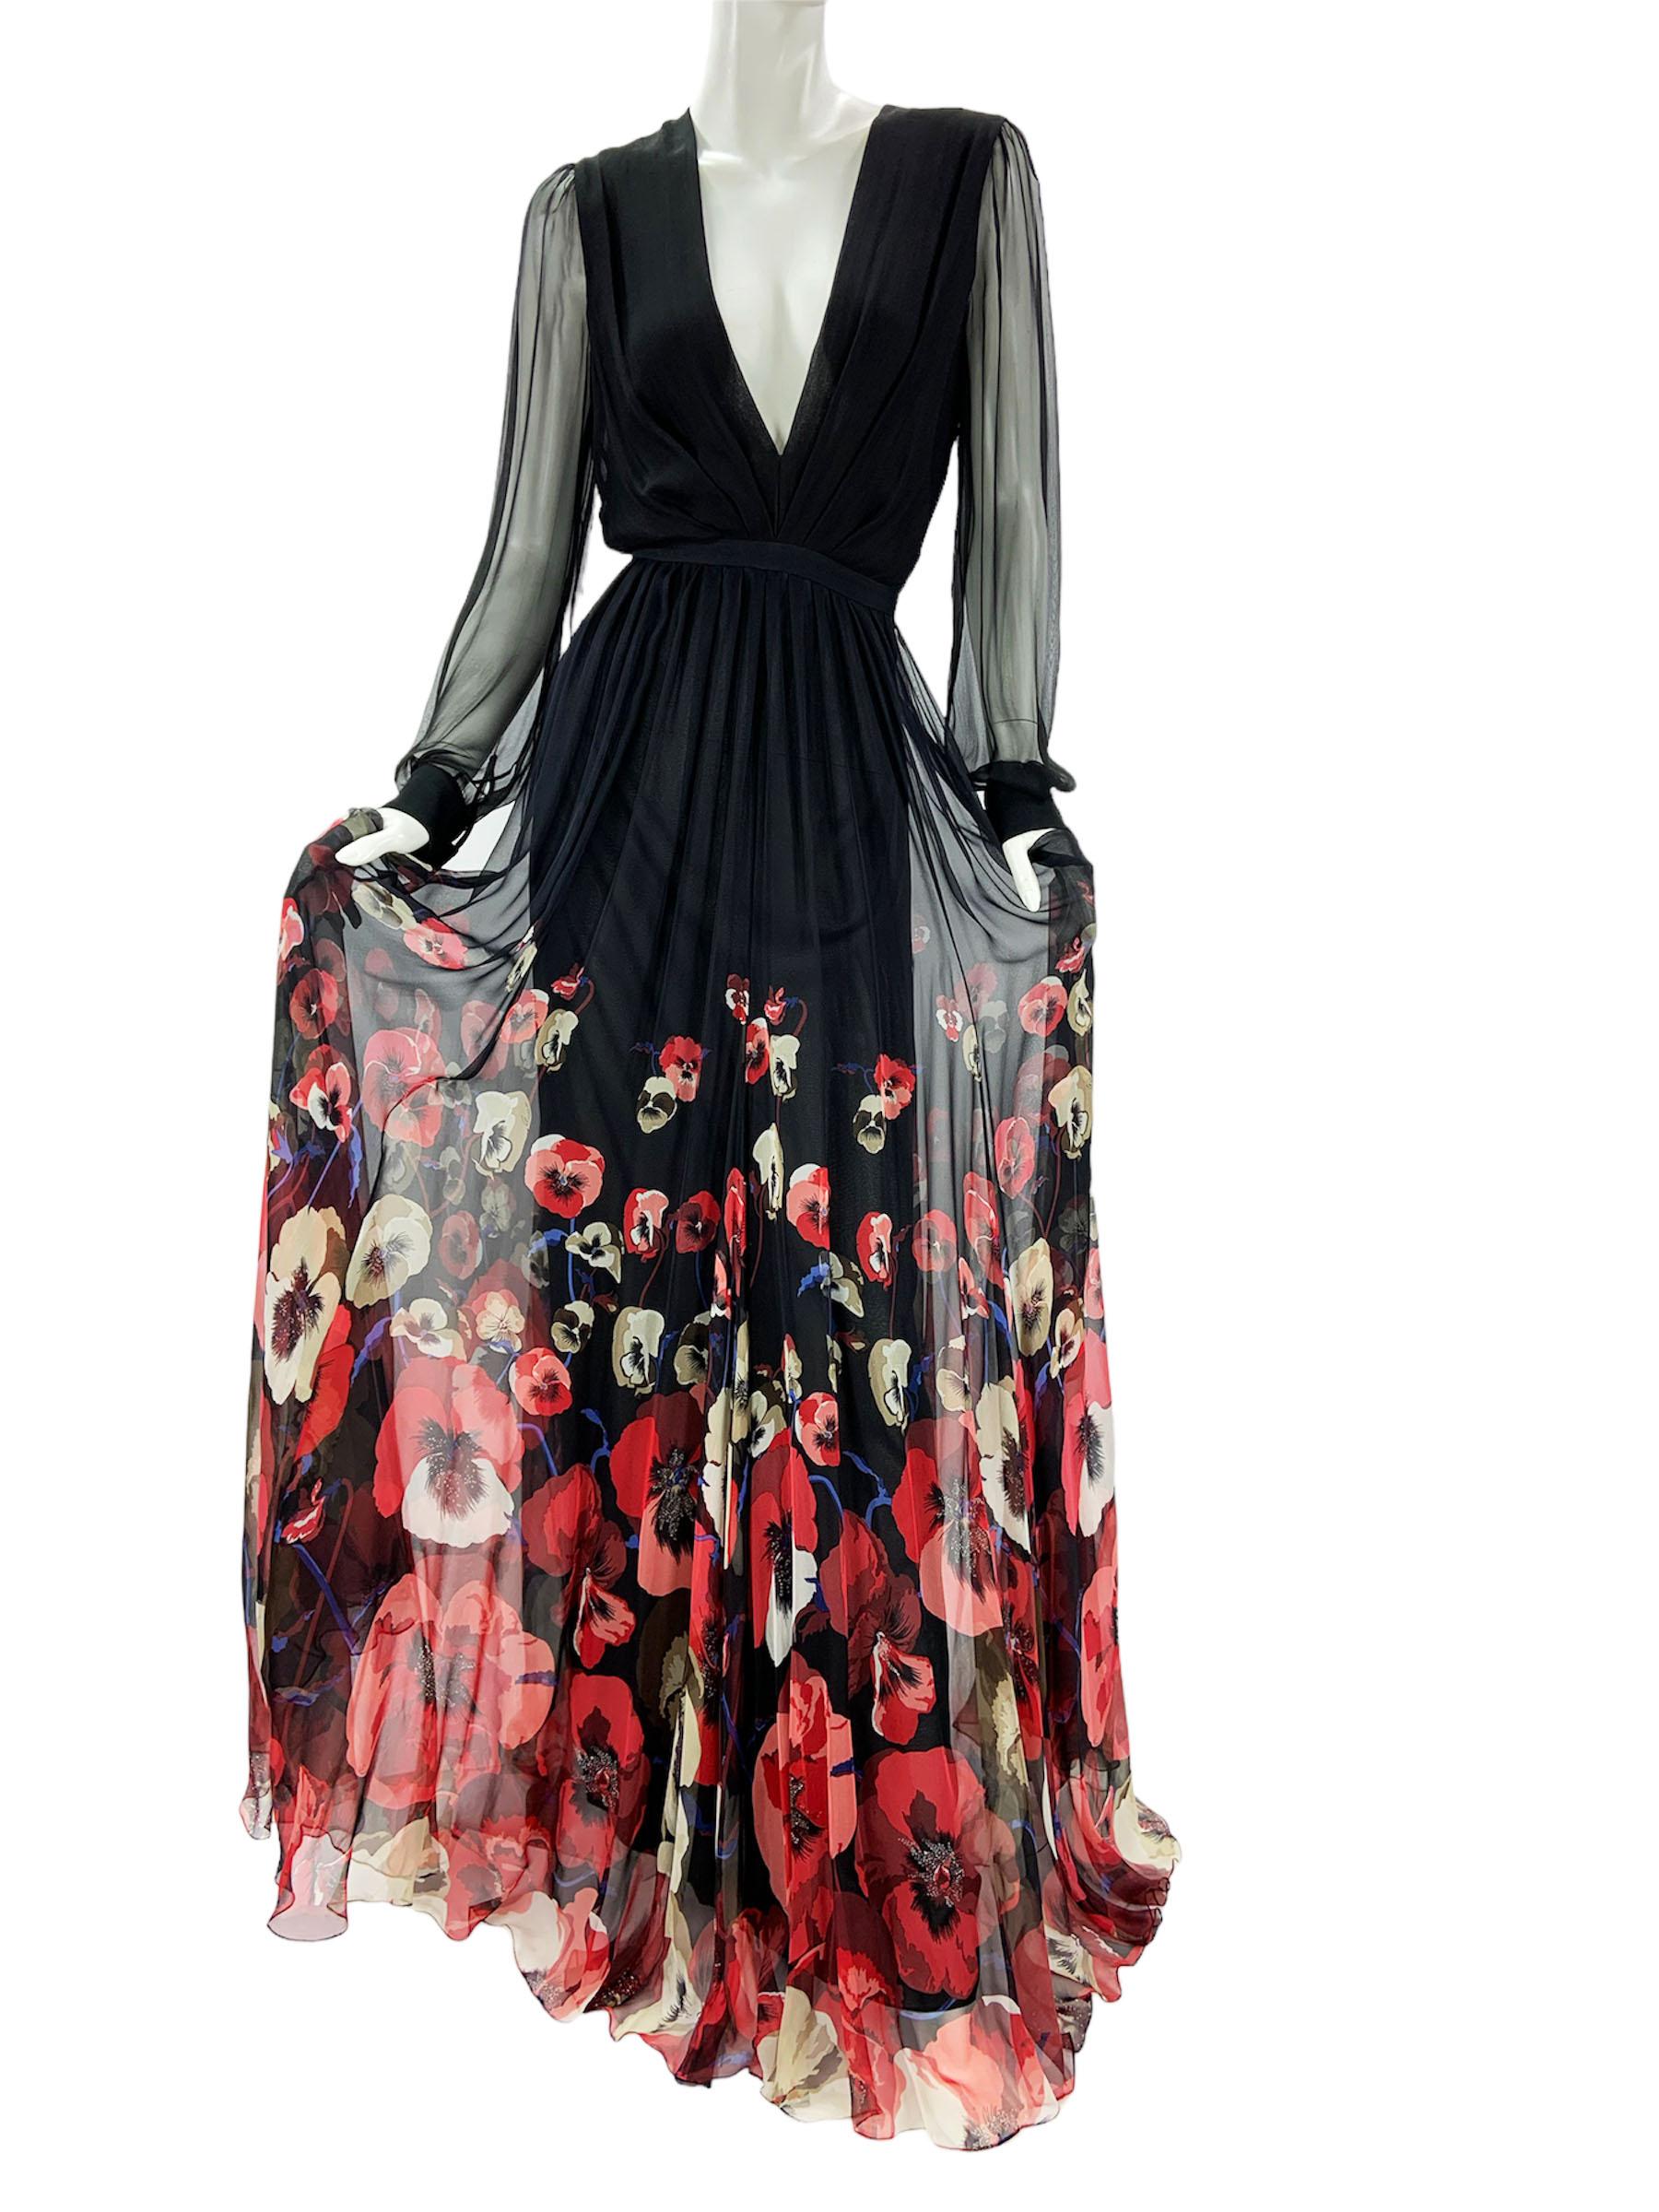 Gucci Black Silk Plunging Pansies Flowers Print Long Dress Gown Italian 42 US 6 For Sale 1